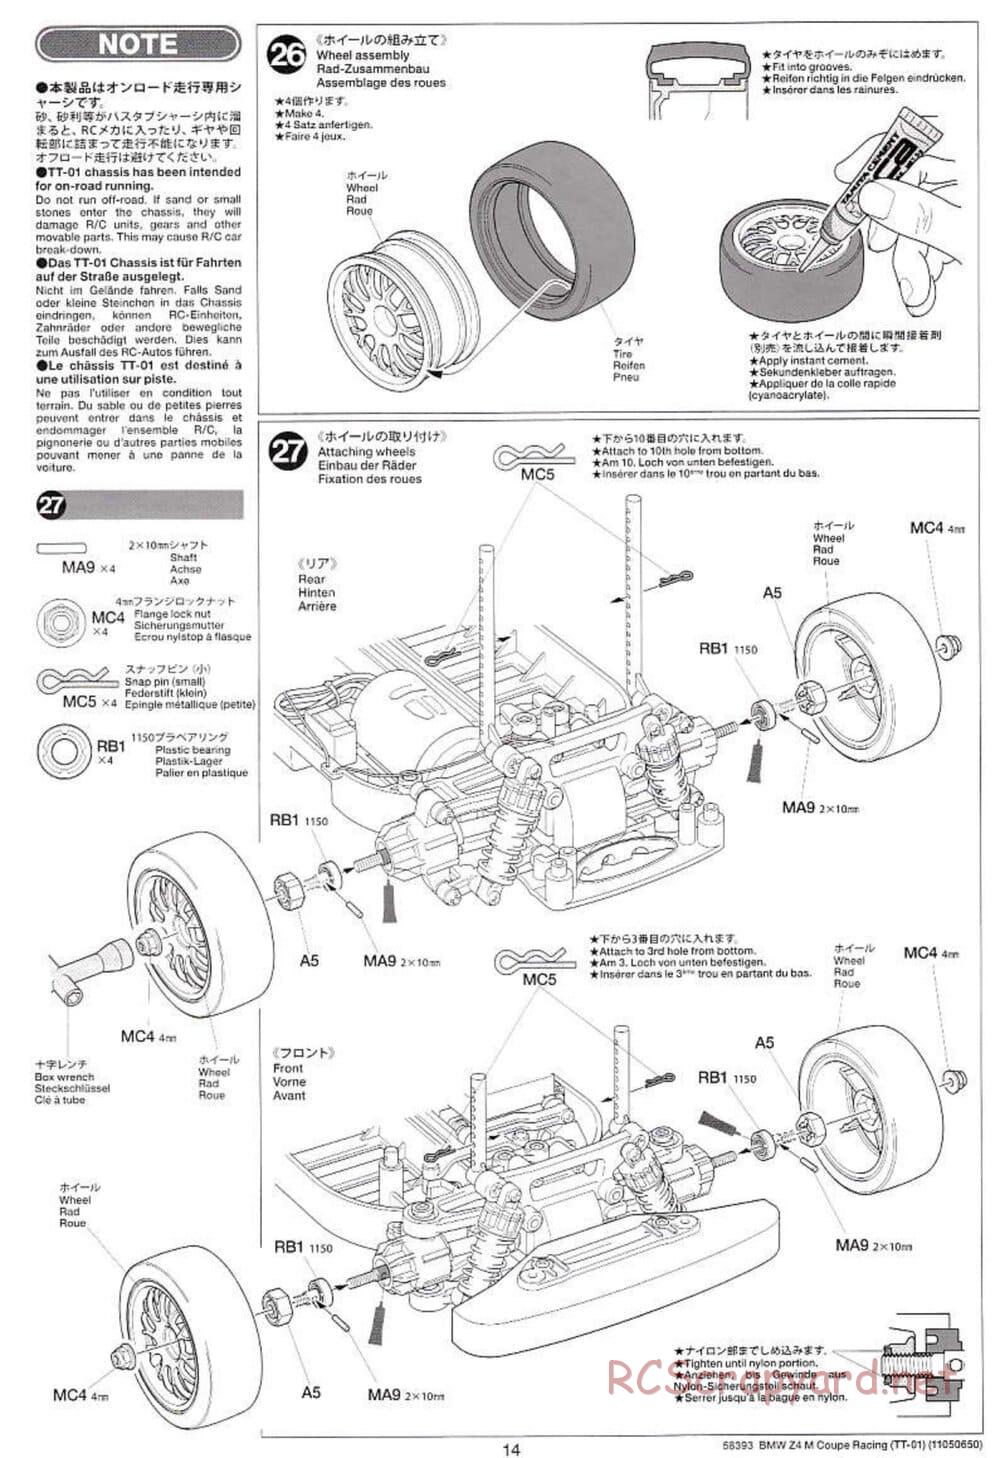 Tamiya - BMW Z4 M Coupe Racing - TT-01 Chassis - Manual - Page 14